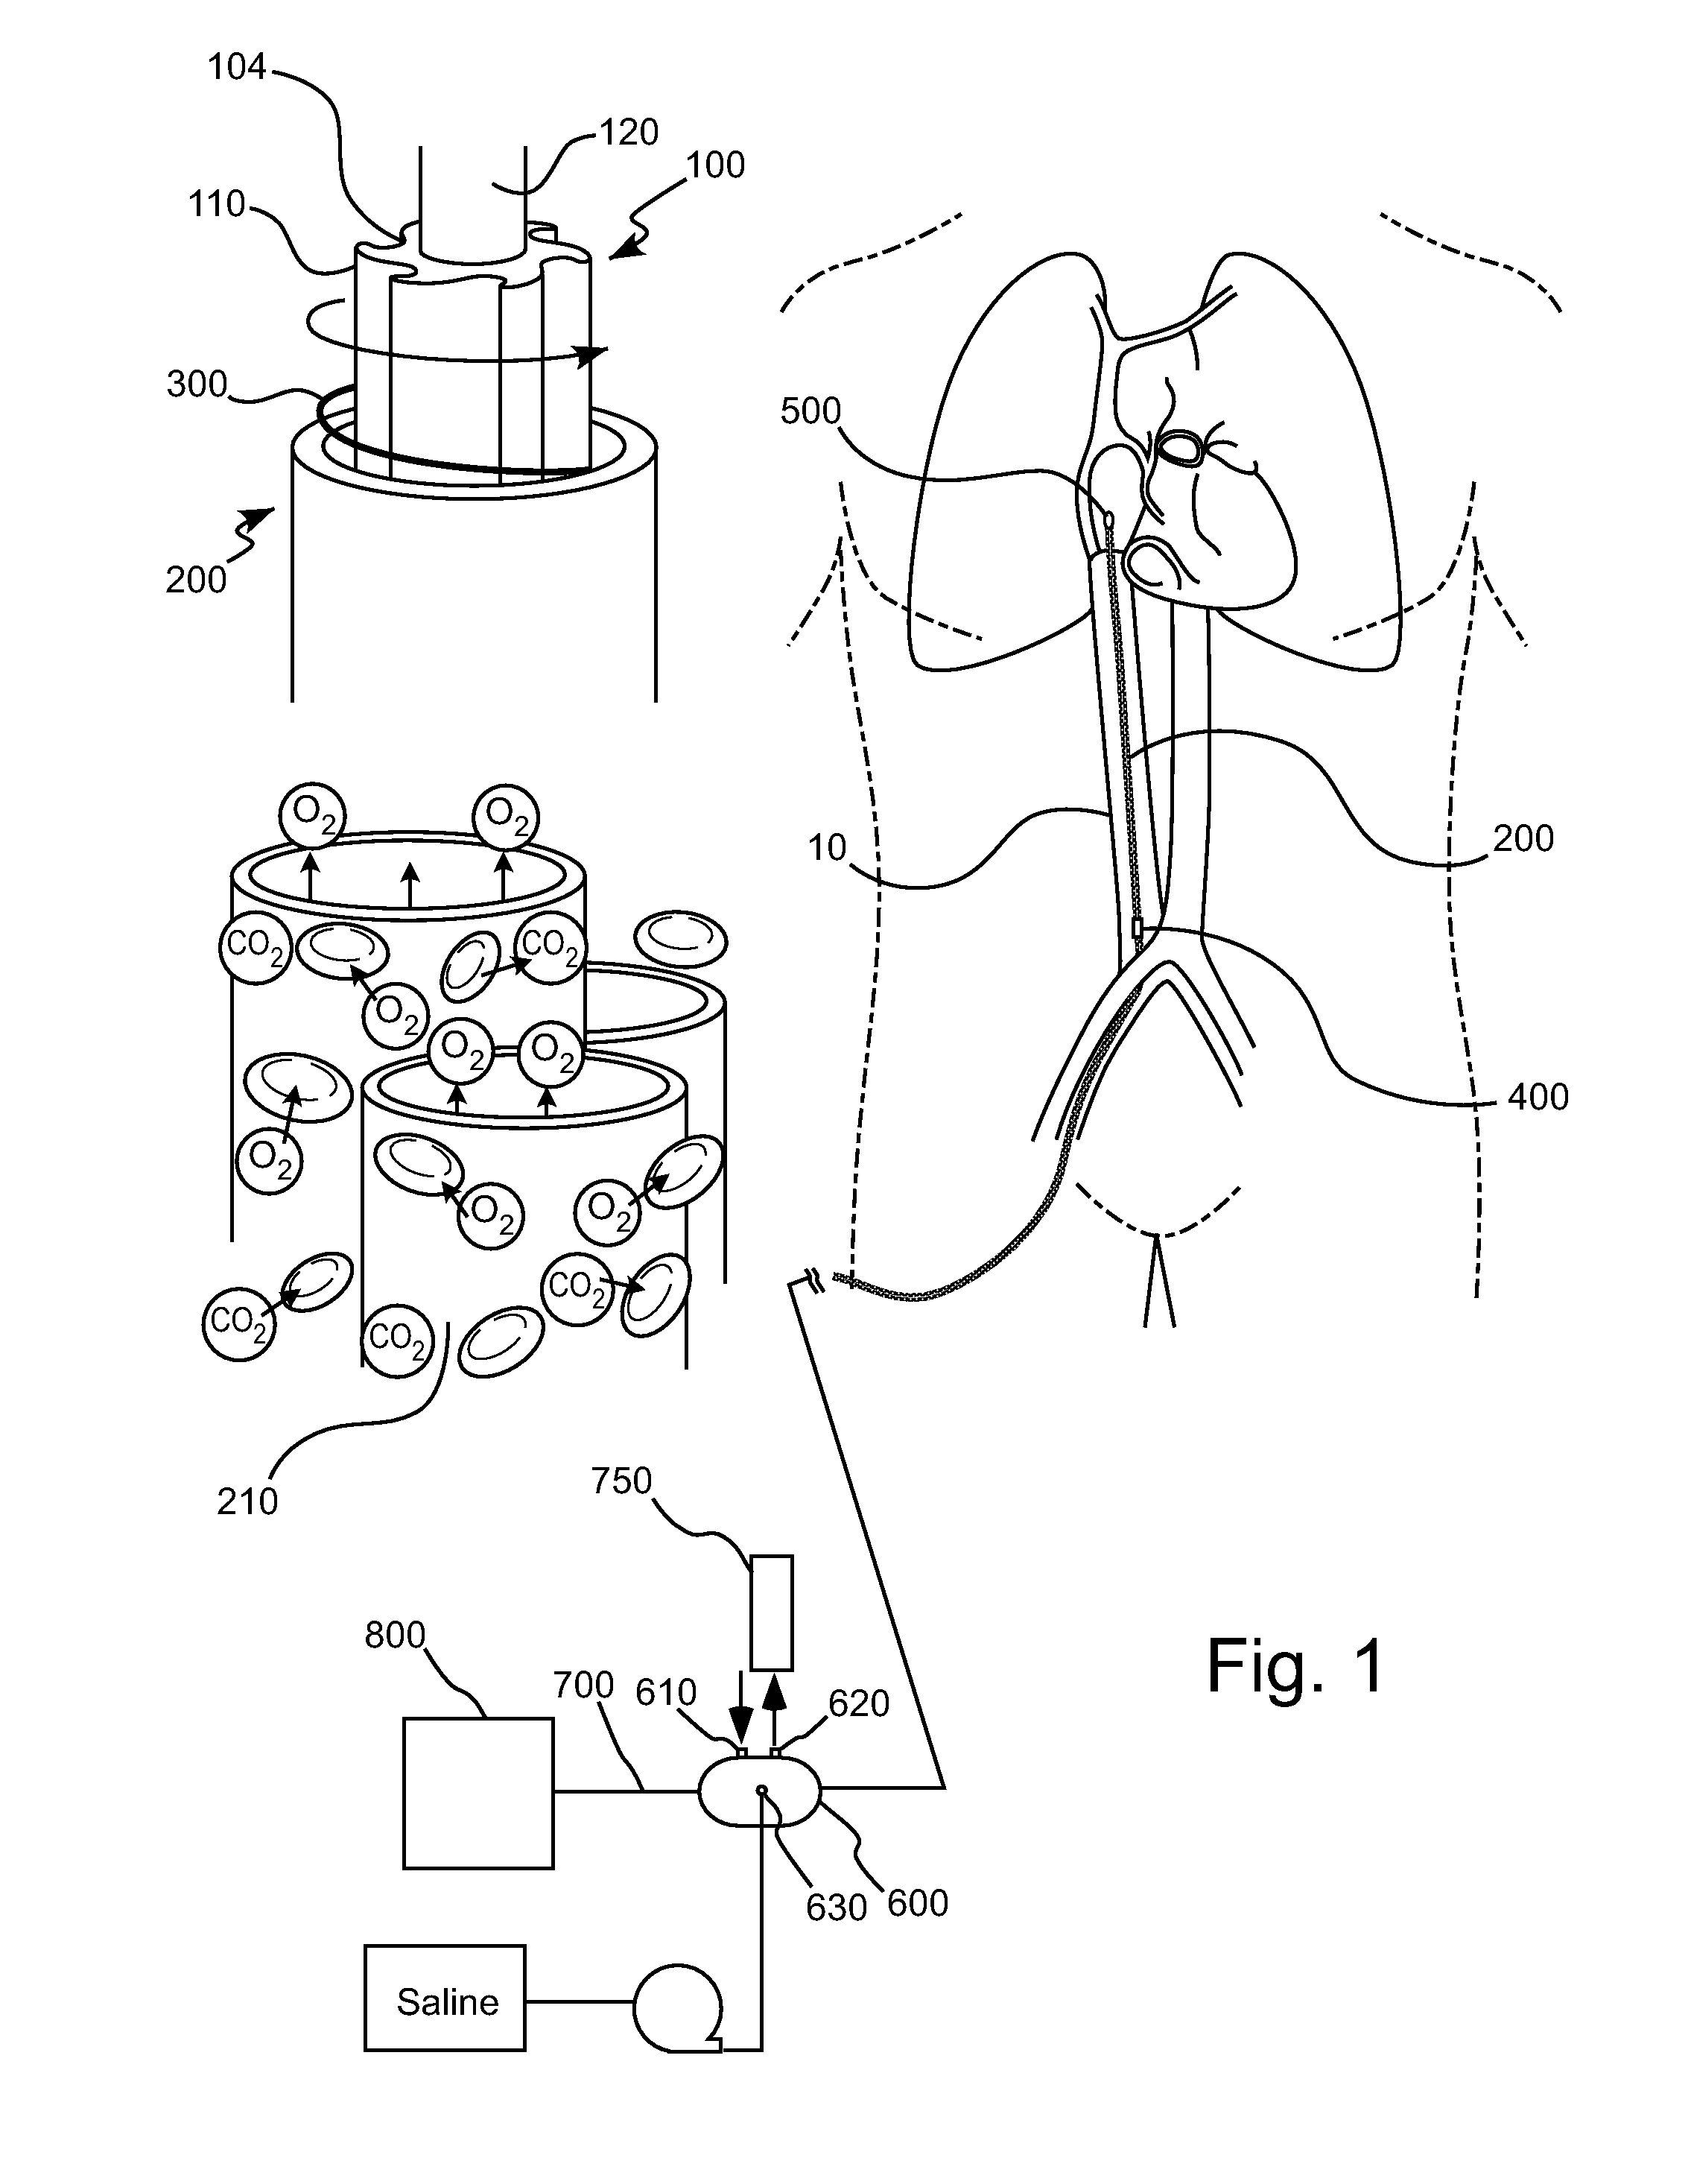 Intracorporeal gas exchange devices, systems and methods